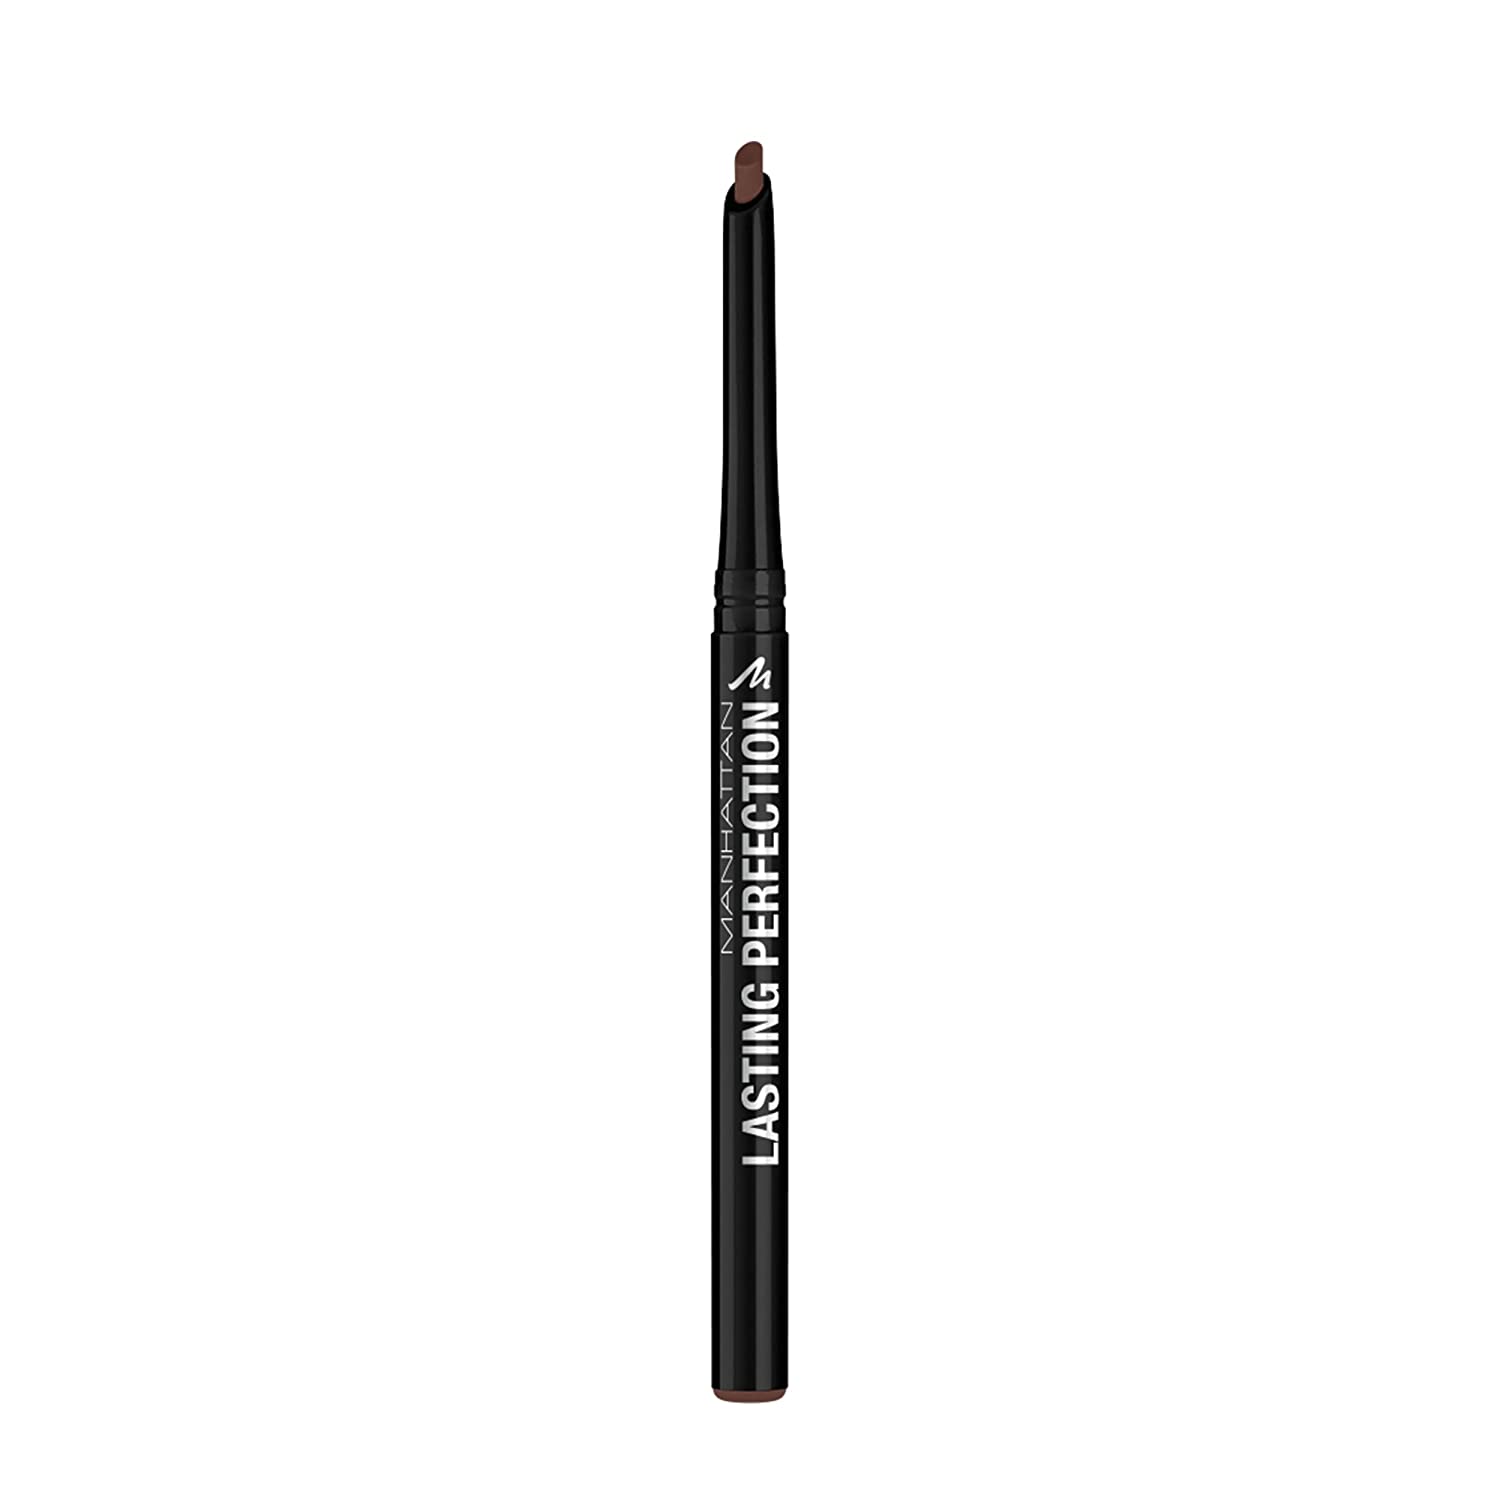 Manhattan Lasting Perfection Lip Liner Colour 94 F Penny Brown Long Lasting Opaque Contour Pen 2g, ‎penny